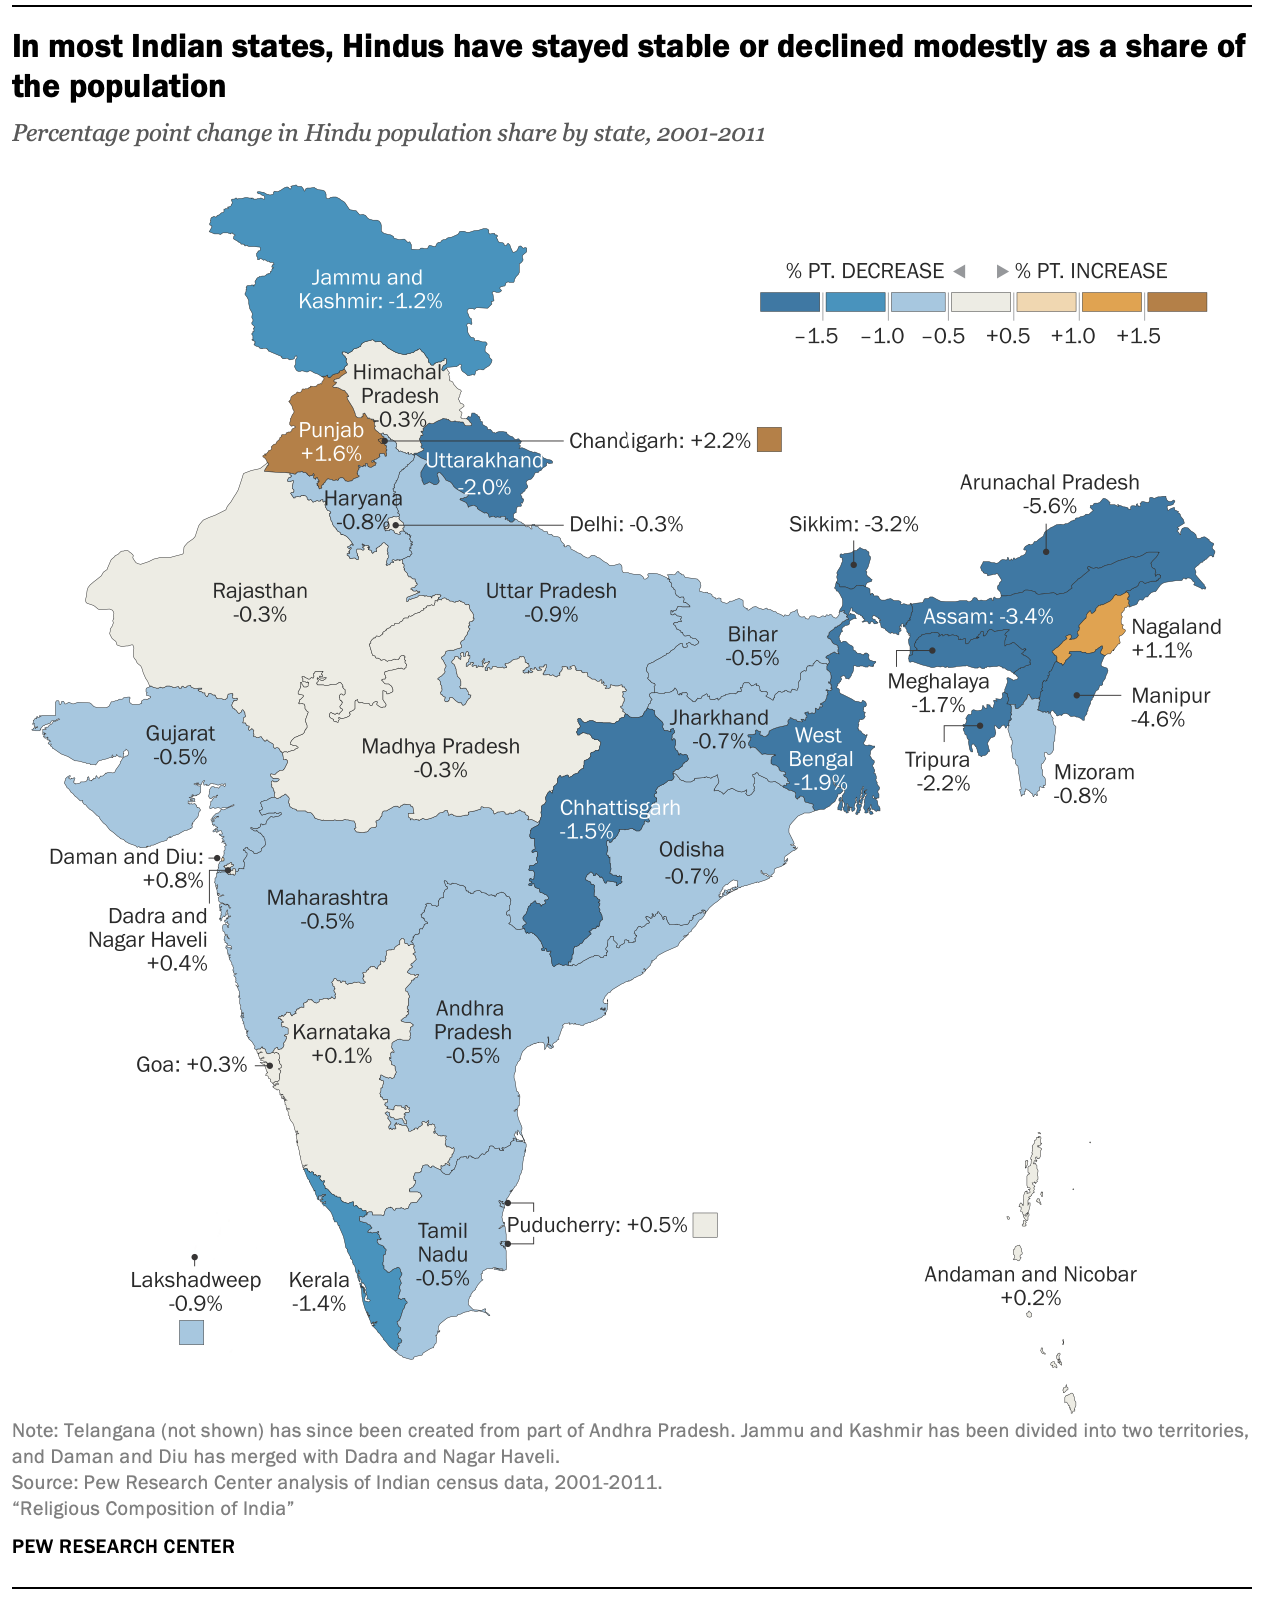 In most Indian states, Hindus have stayed stable or declined modestly as a share of the population